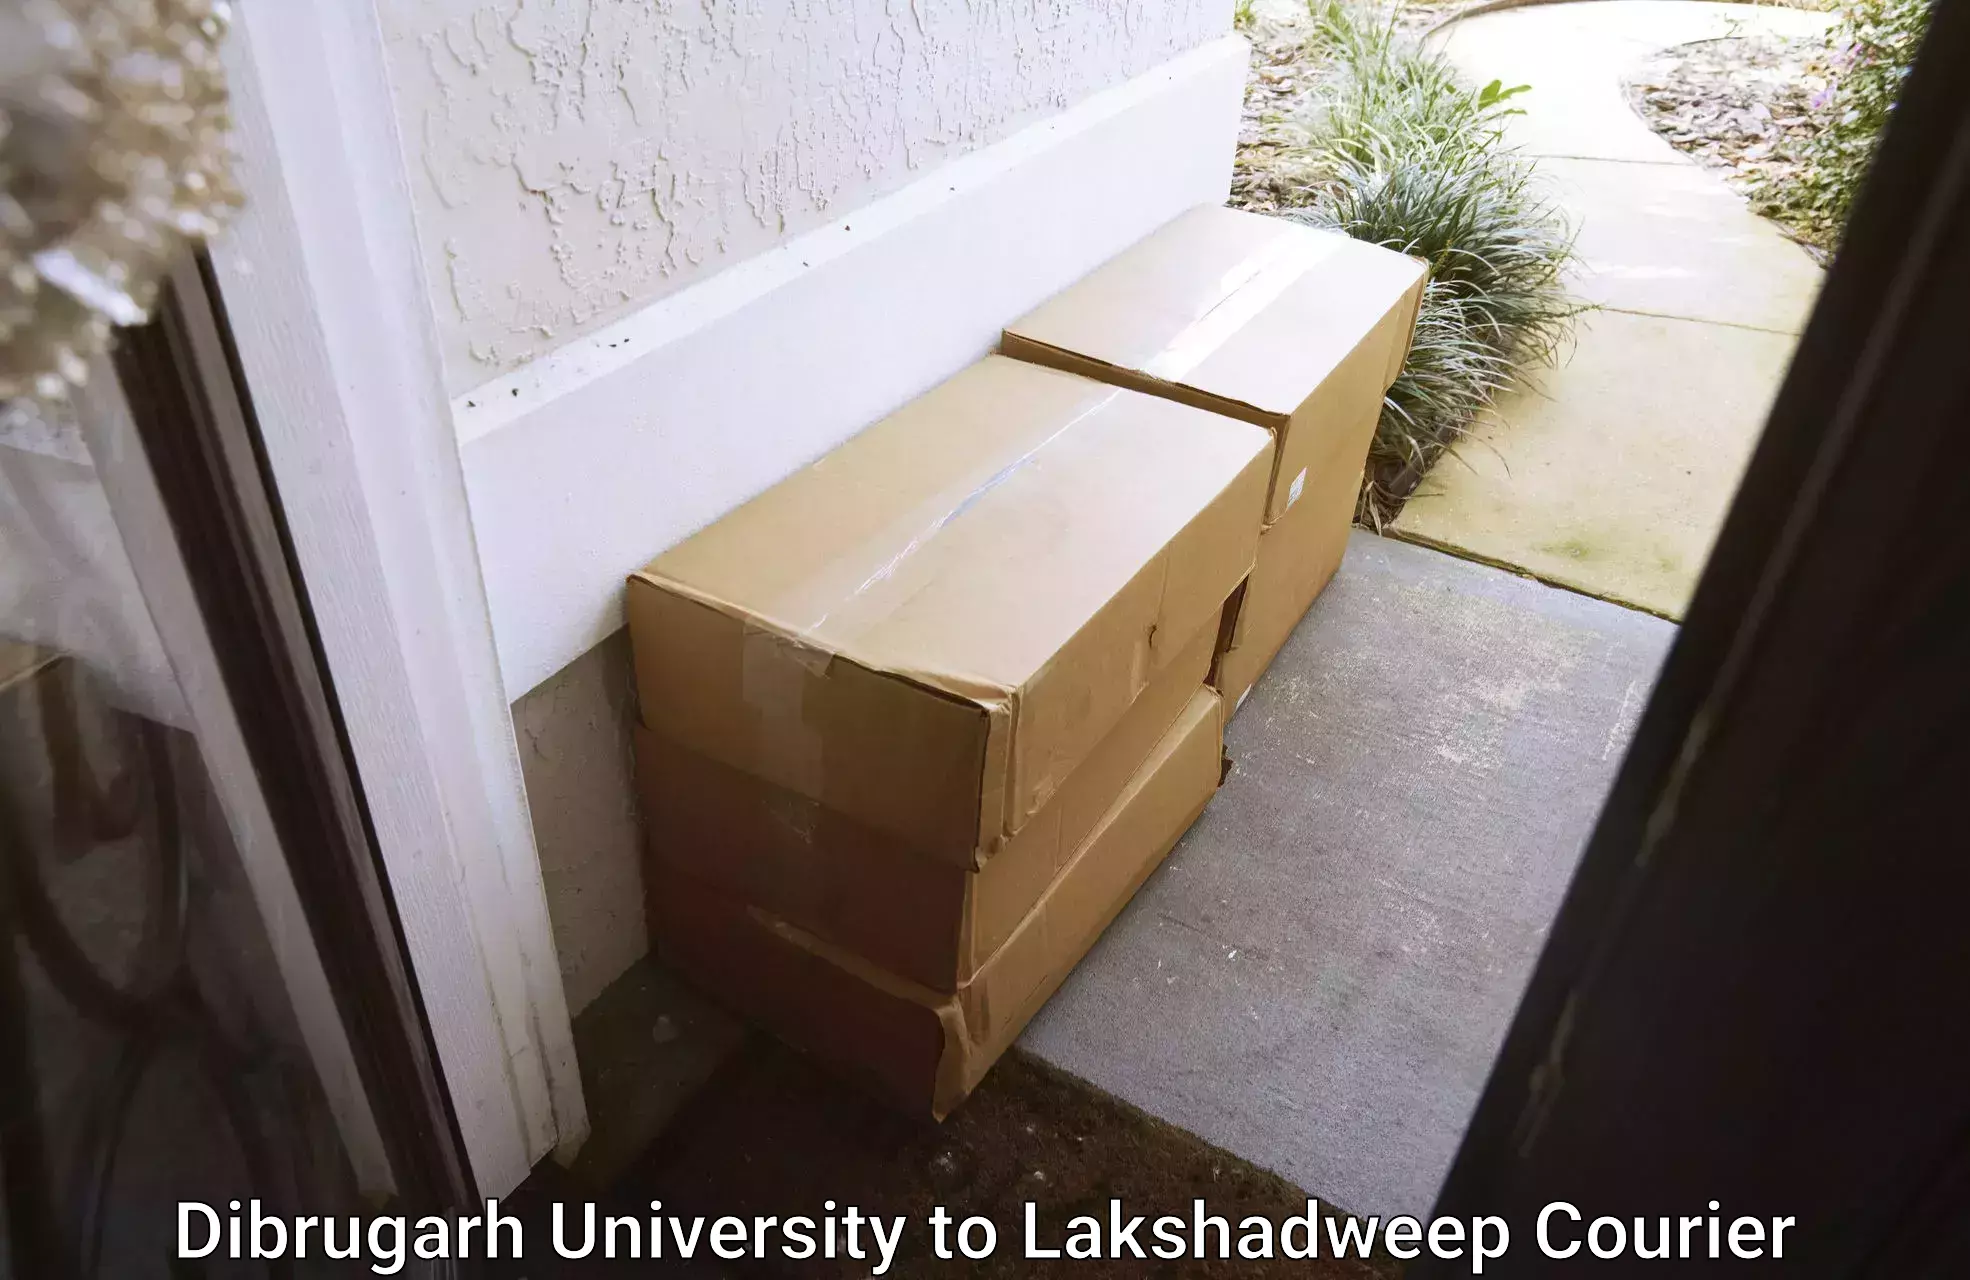 Small parcel delivery Dibrugarh University to Lakshadweep